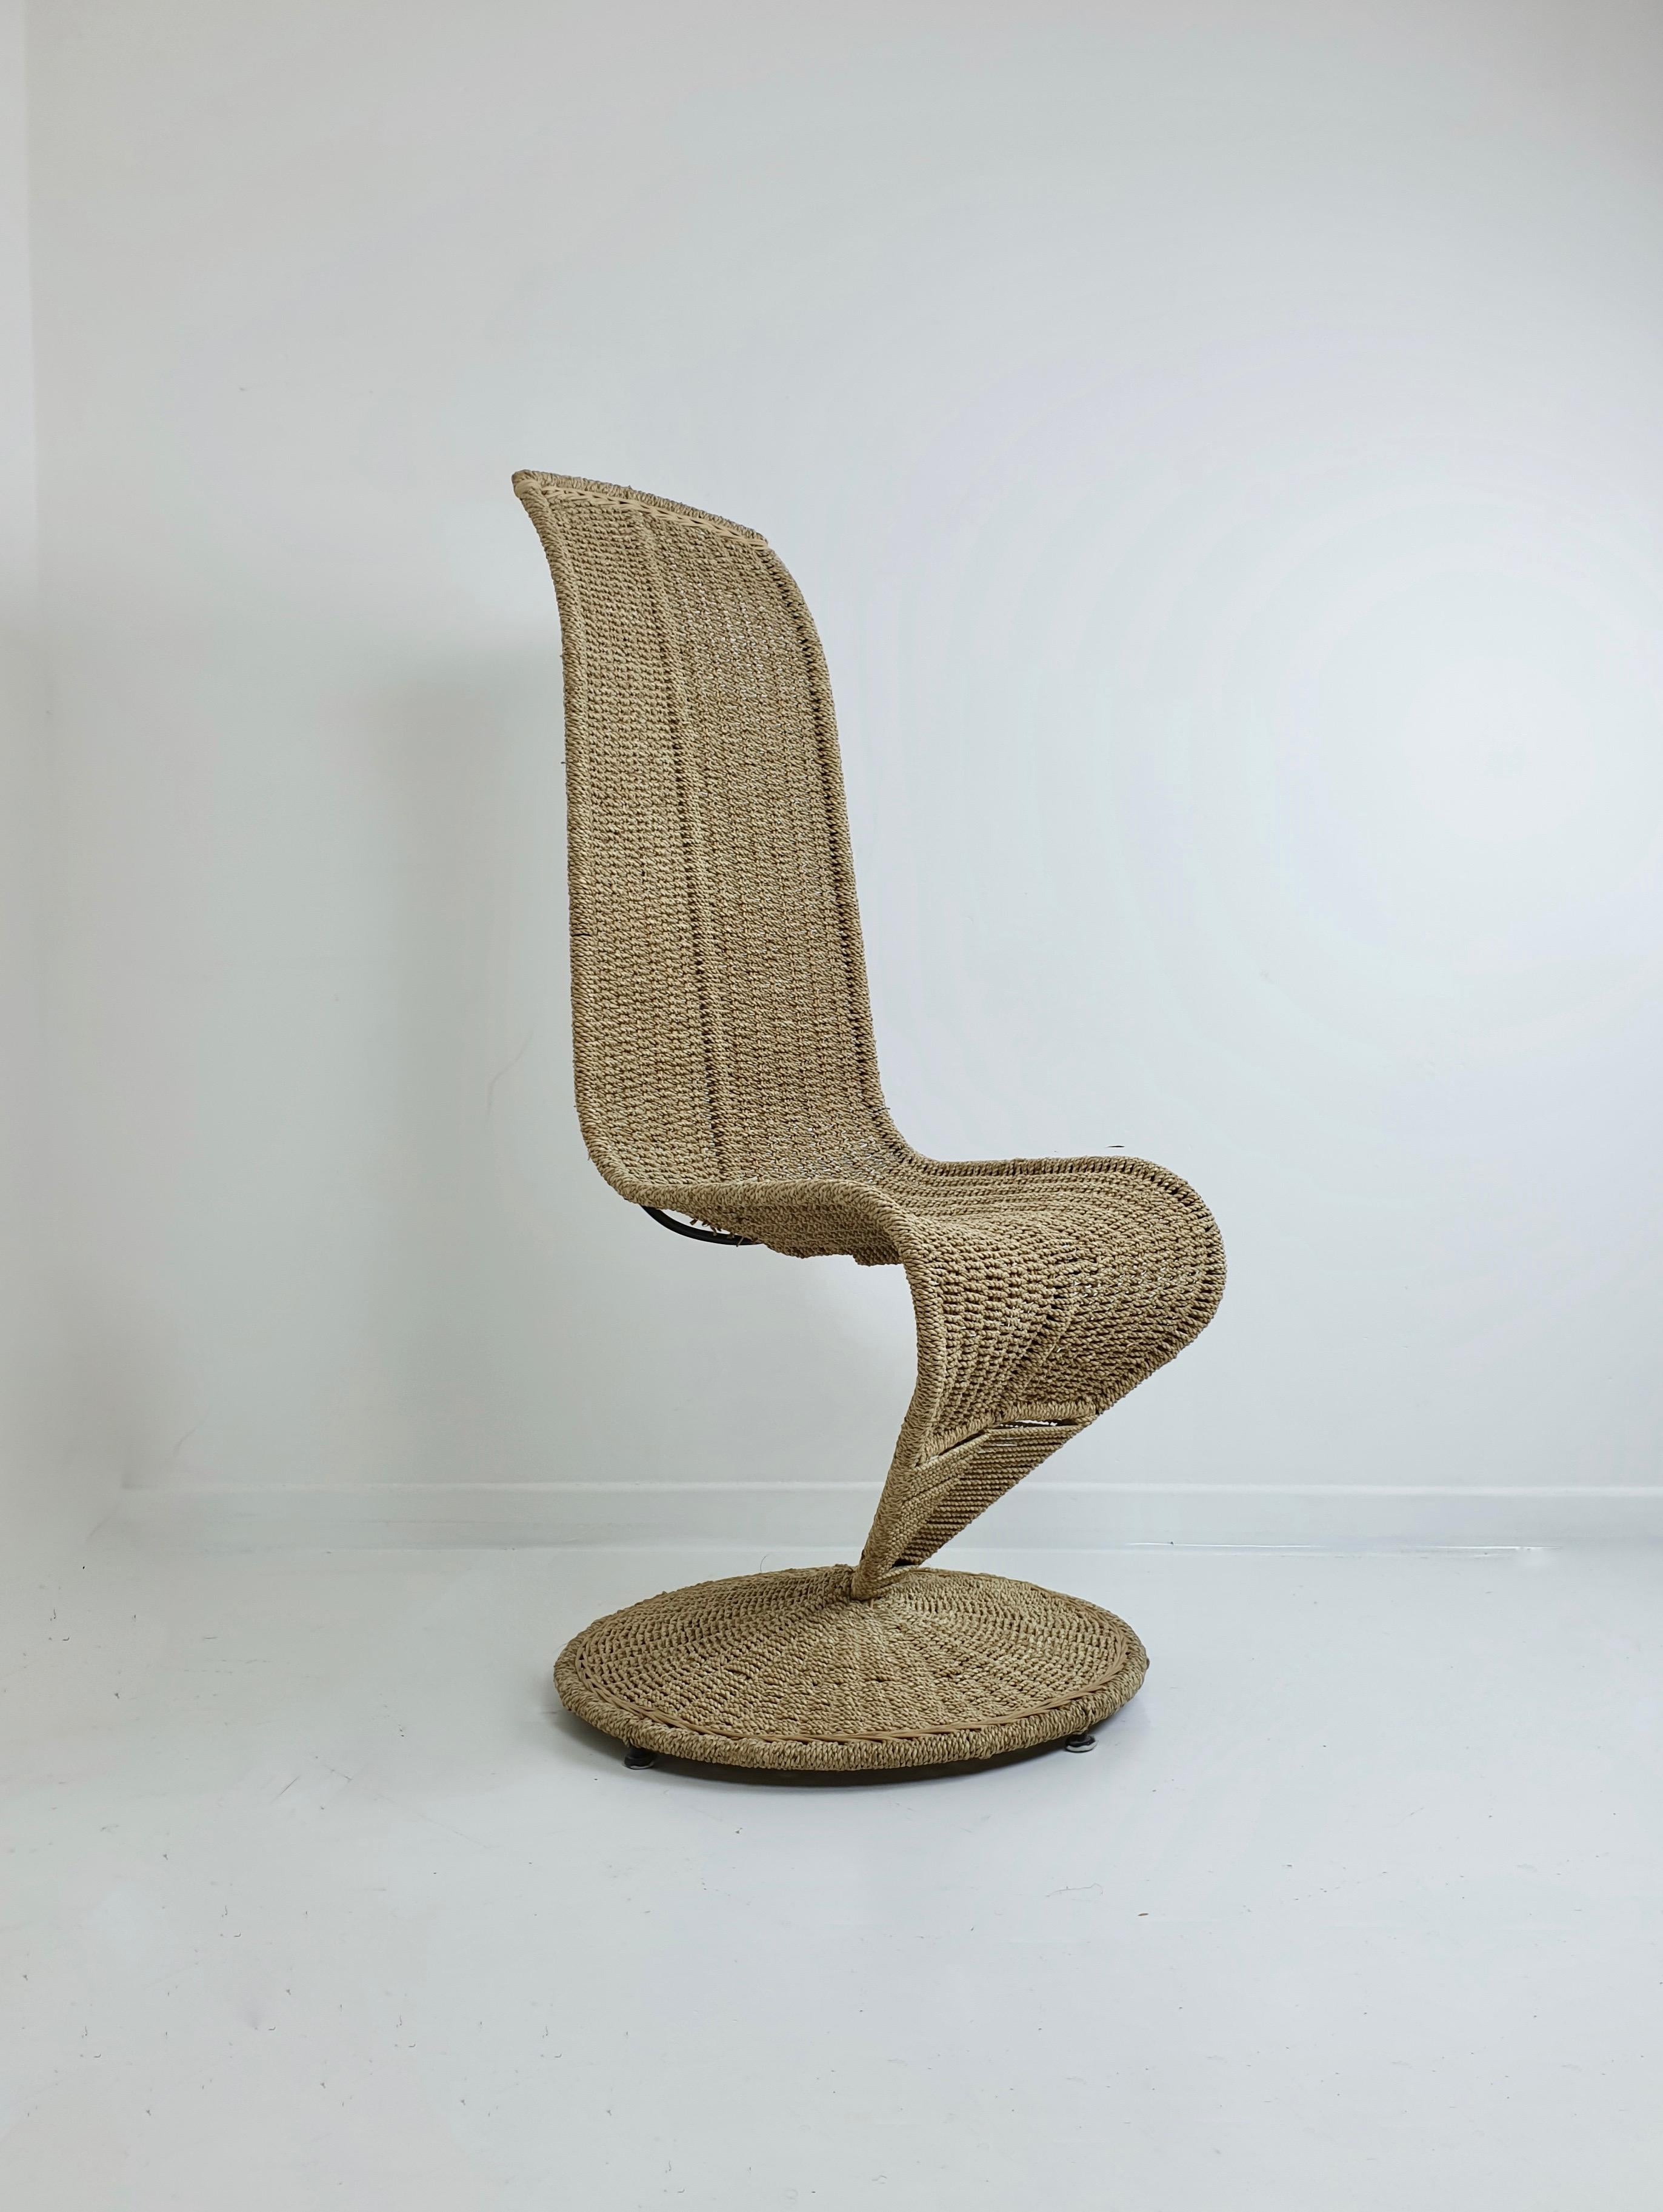 Midcentury Woven Rope 'S' Chair by Marzio Cecchi, Italy, circa 1970 For Sale 2